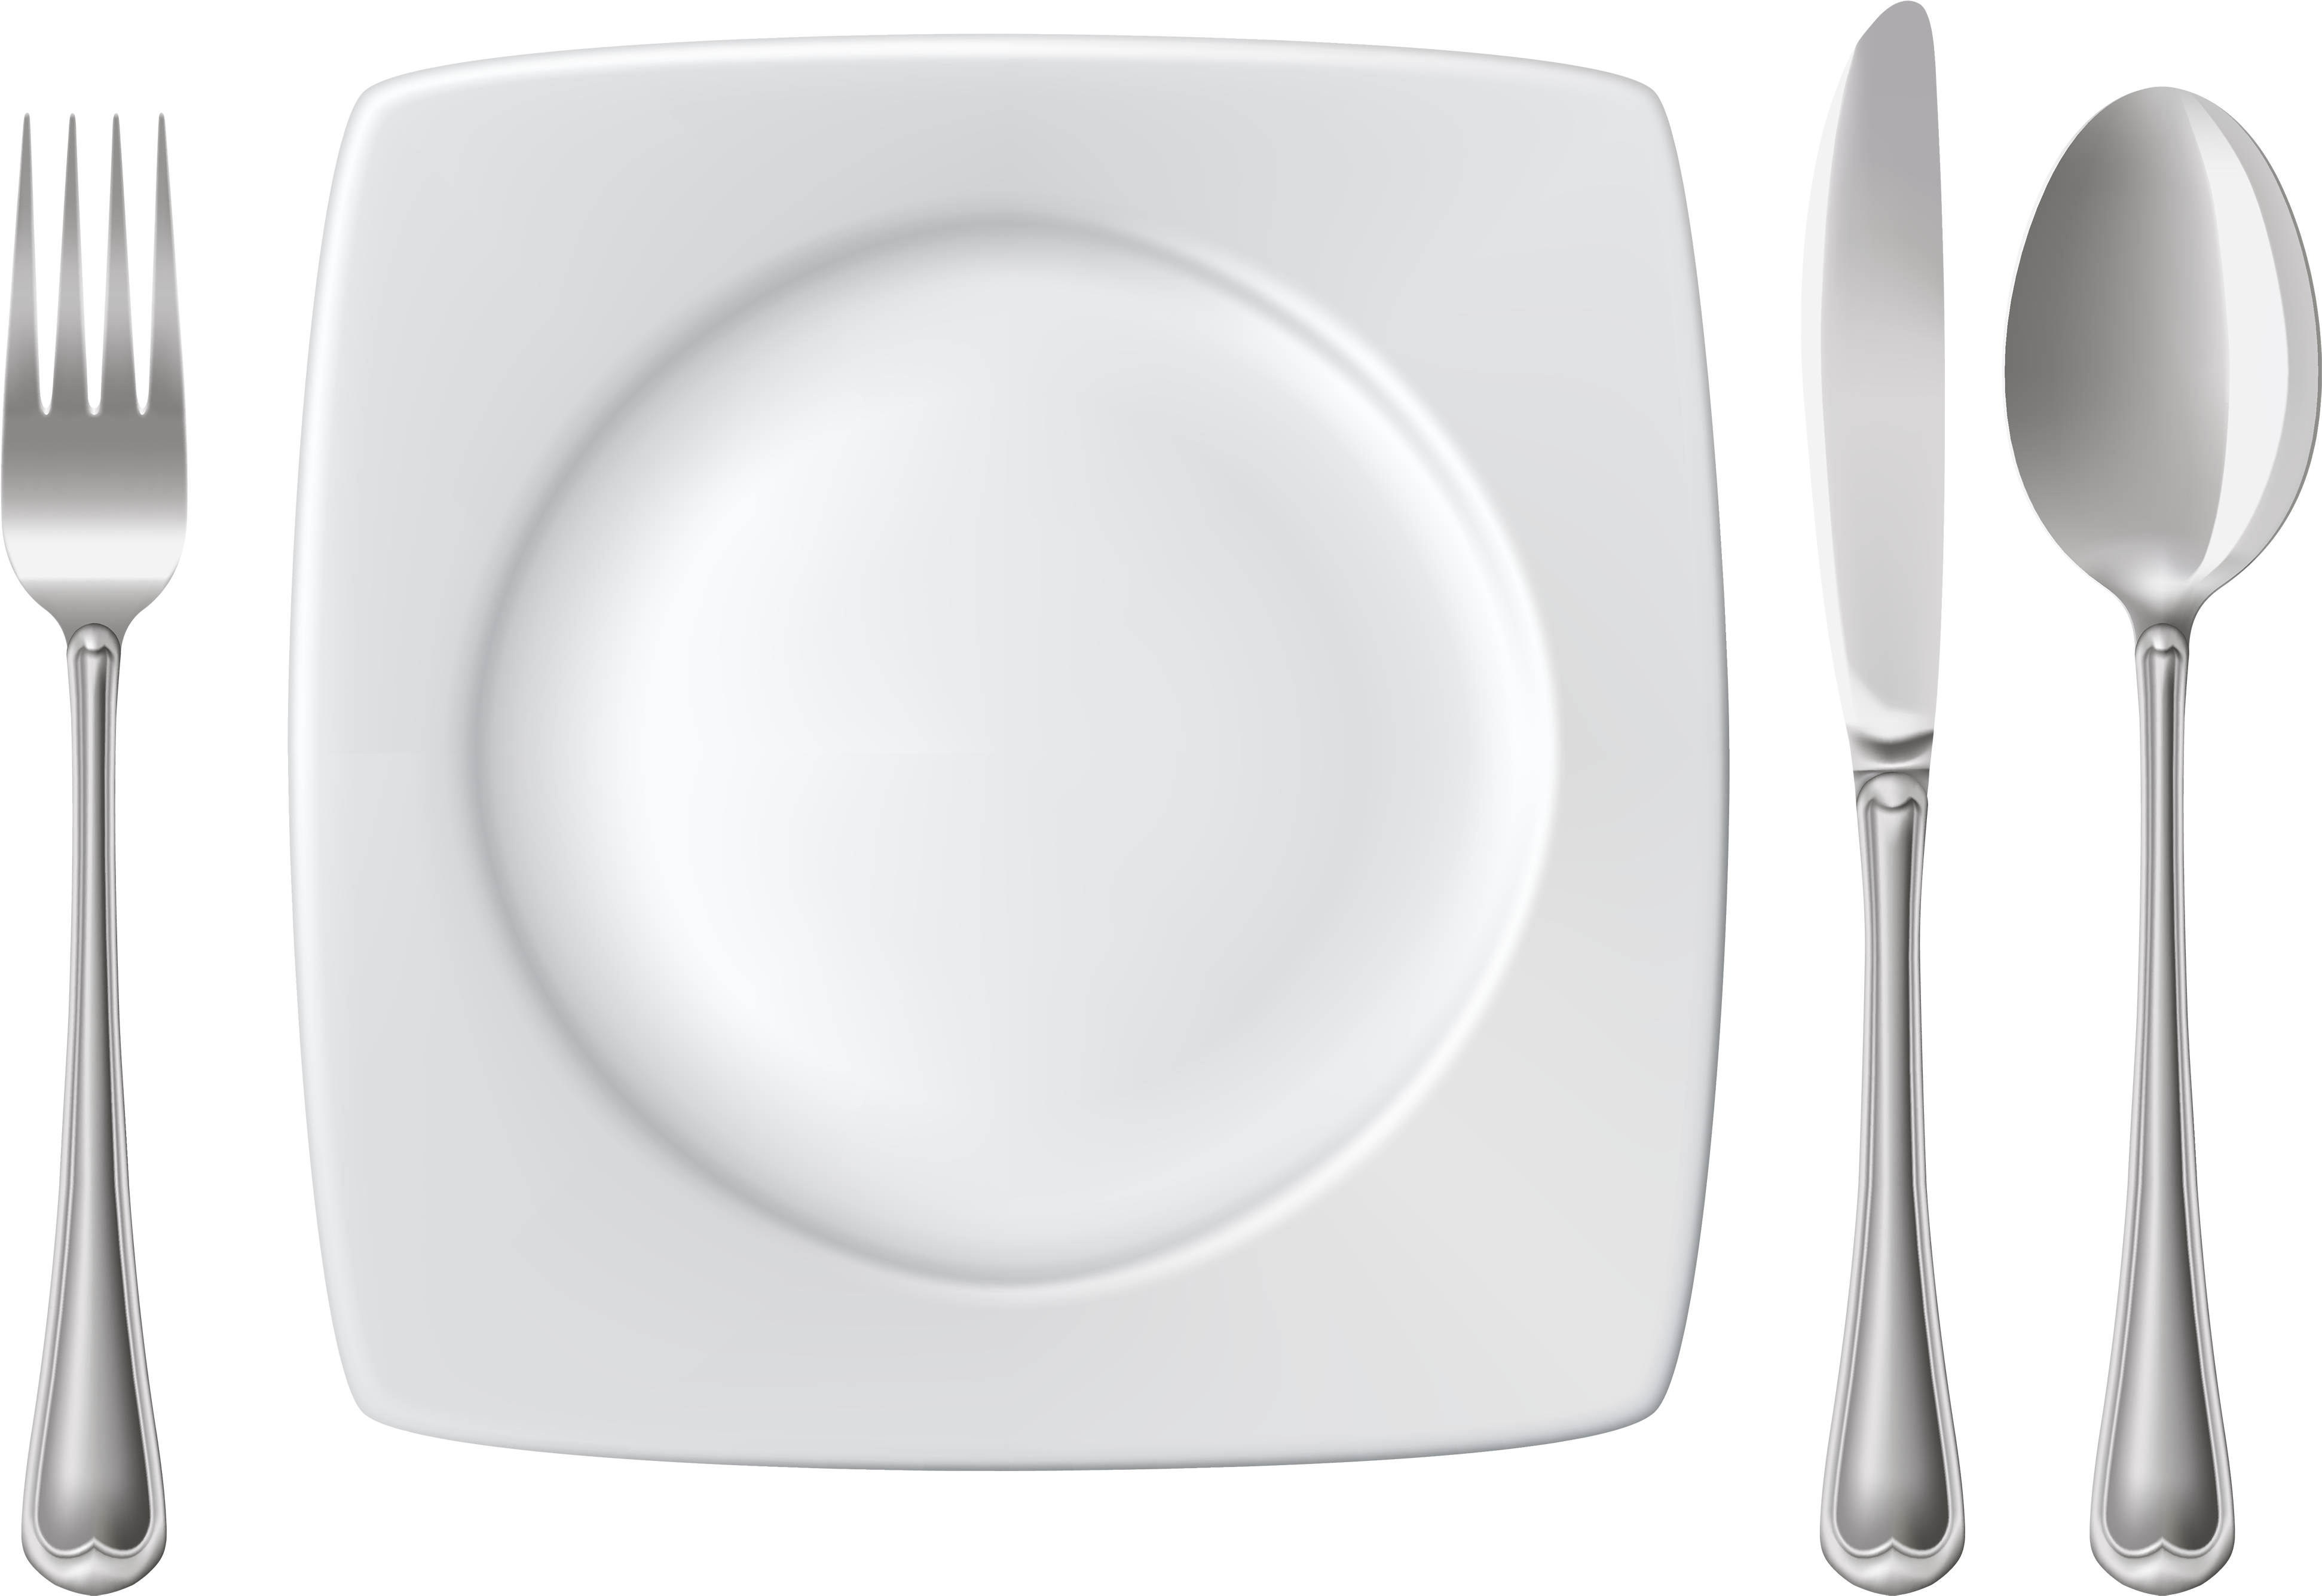 dish clipart round plate